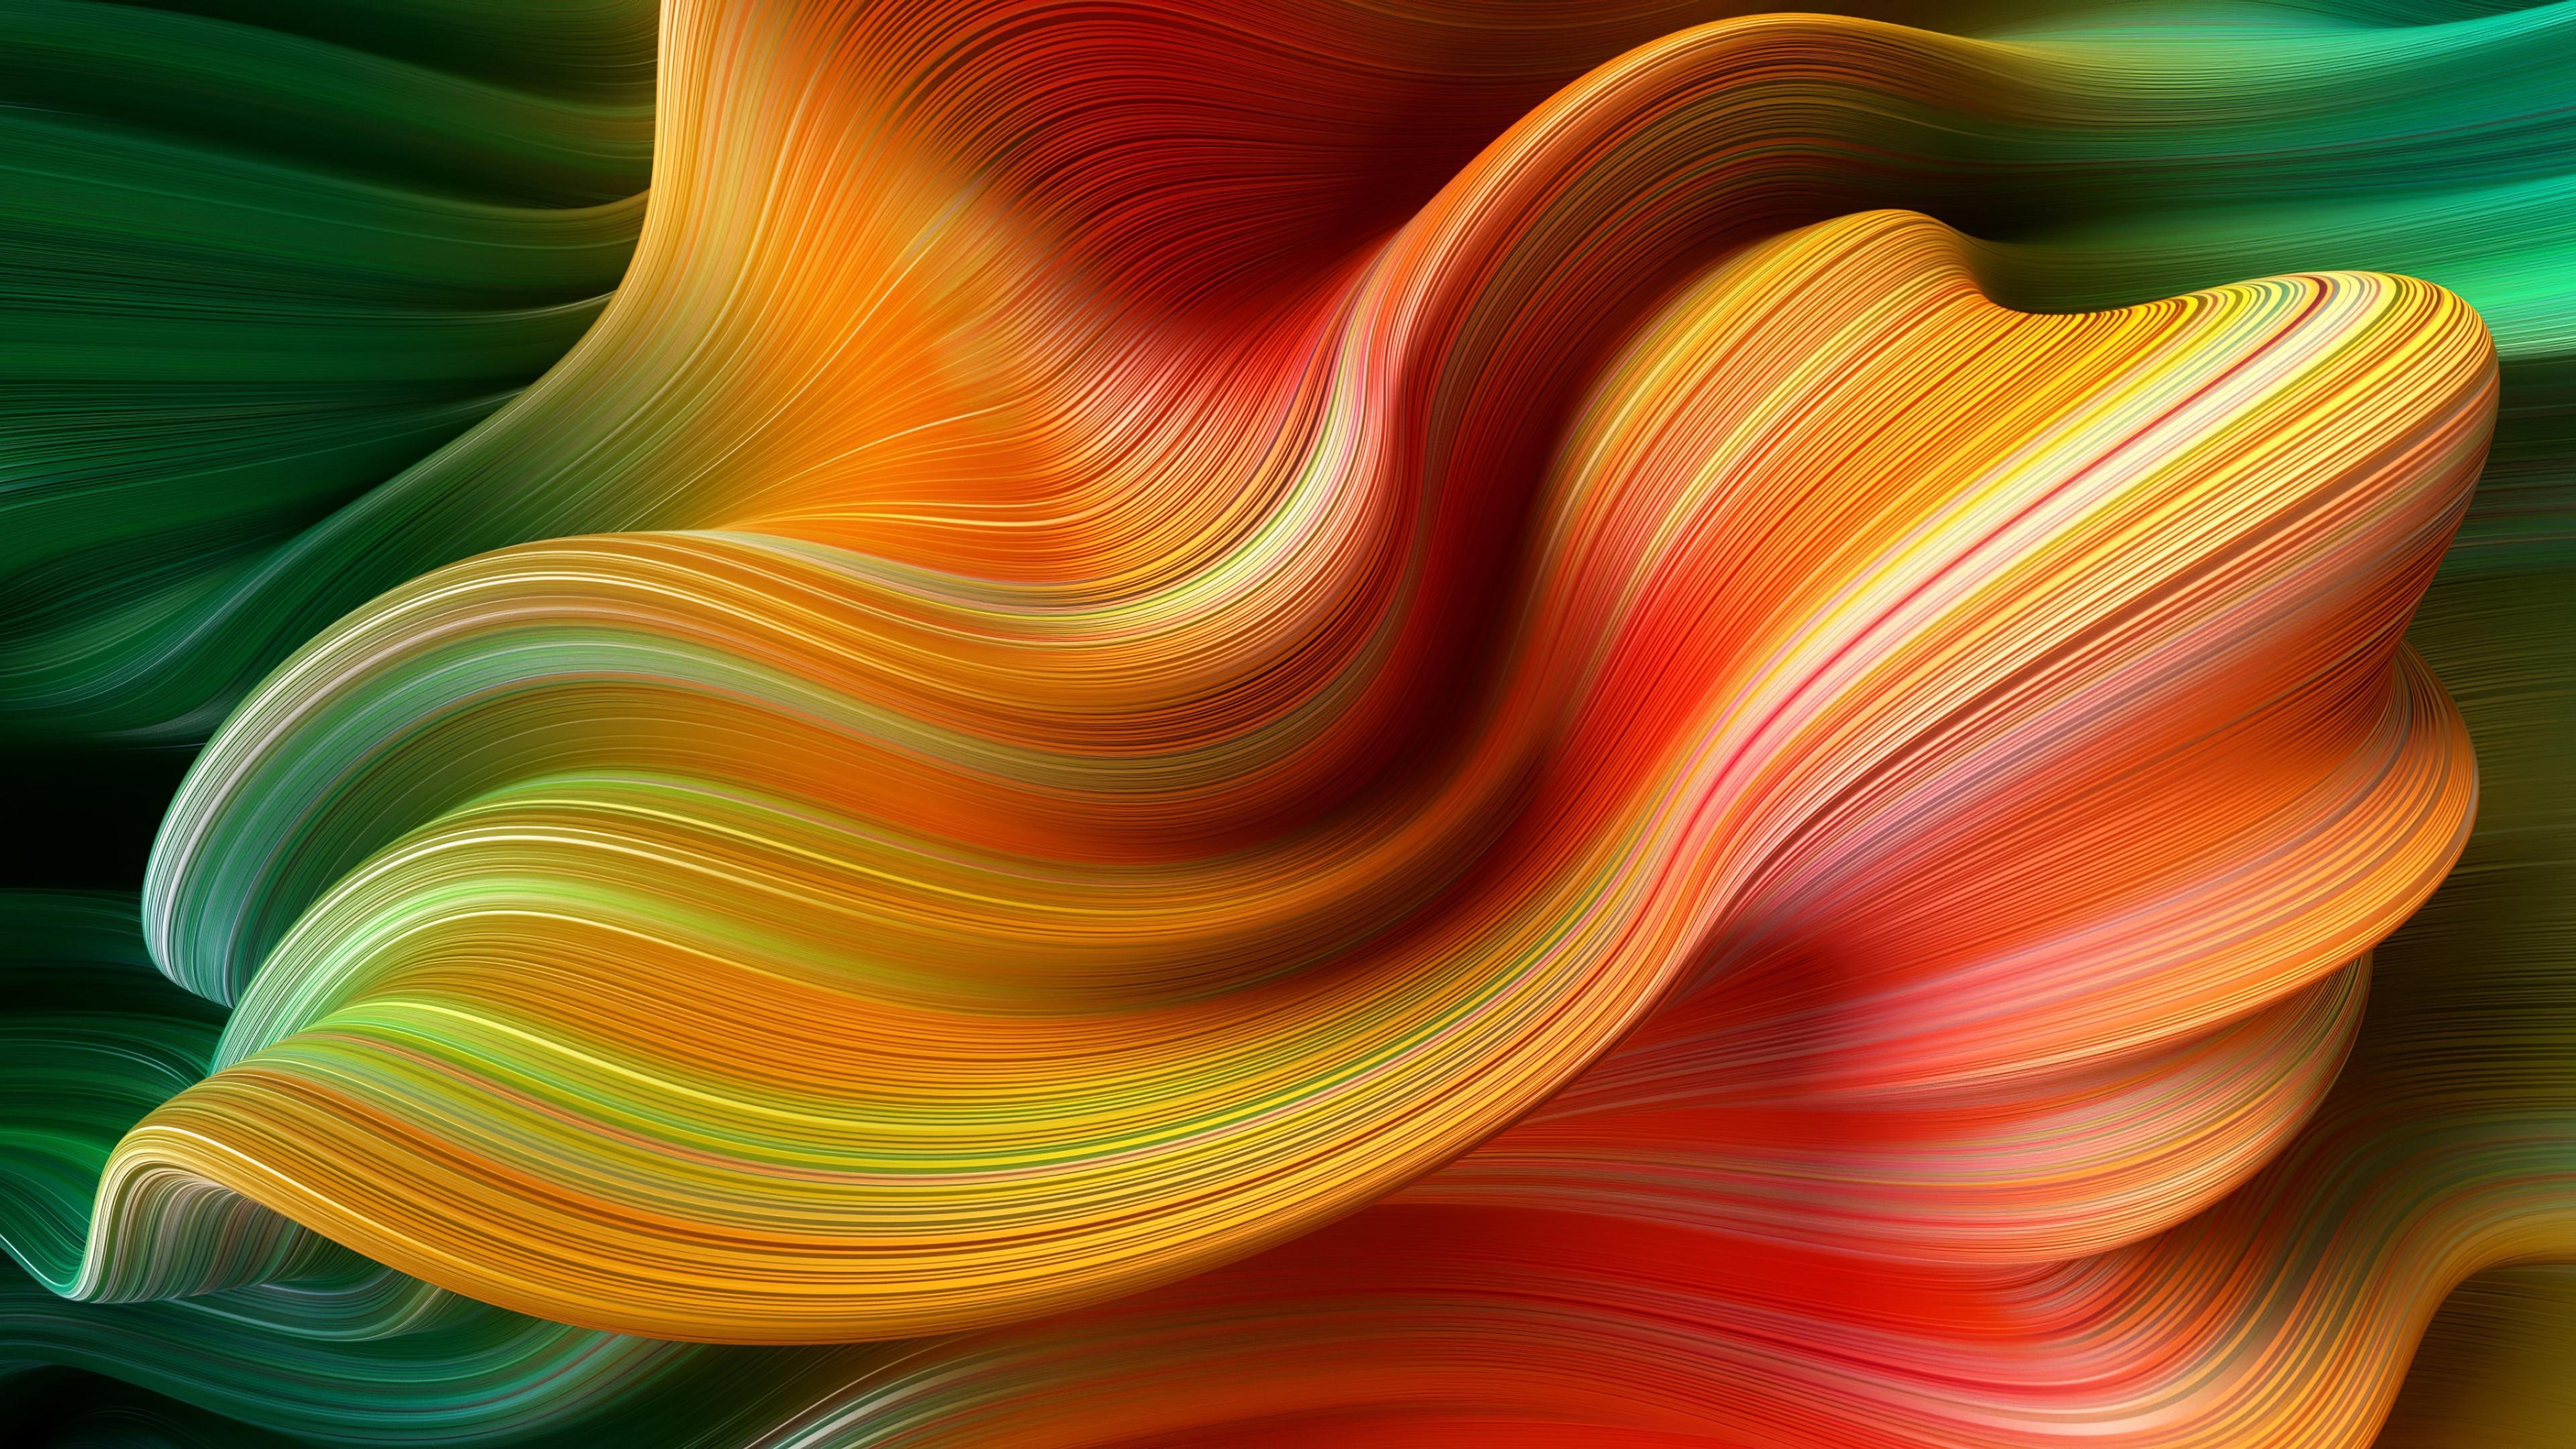 3840 x 2160 · jpeg - 3840x2160 Colorful Shapes Abstract 4k 4k HD 4k Wallpapers, Images ...